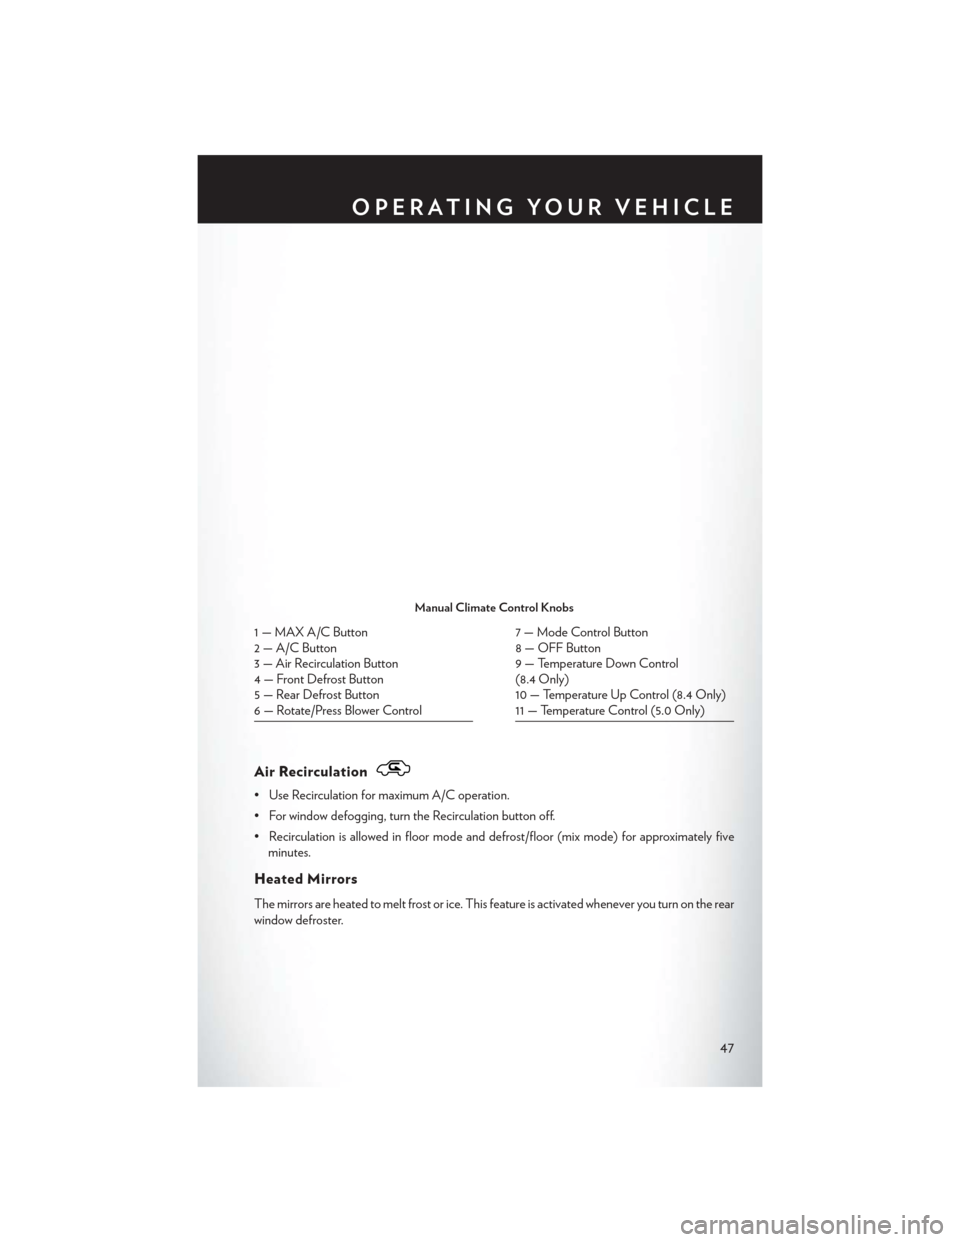 CHRYSLER 200 2015 2.G Service Manual Air Recirculation
• Use Recirculation for maximum A/C operation.
• For window defogging, turn the Recirculation button off.
• Recirculation is allowed in floor mode and defrost/floor (mix mode) 